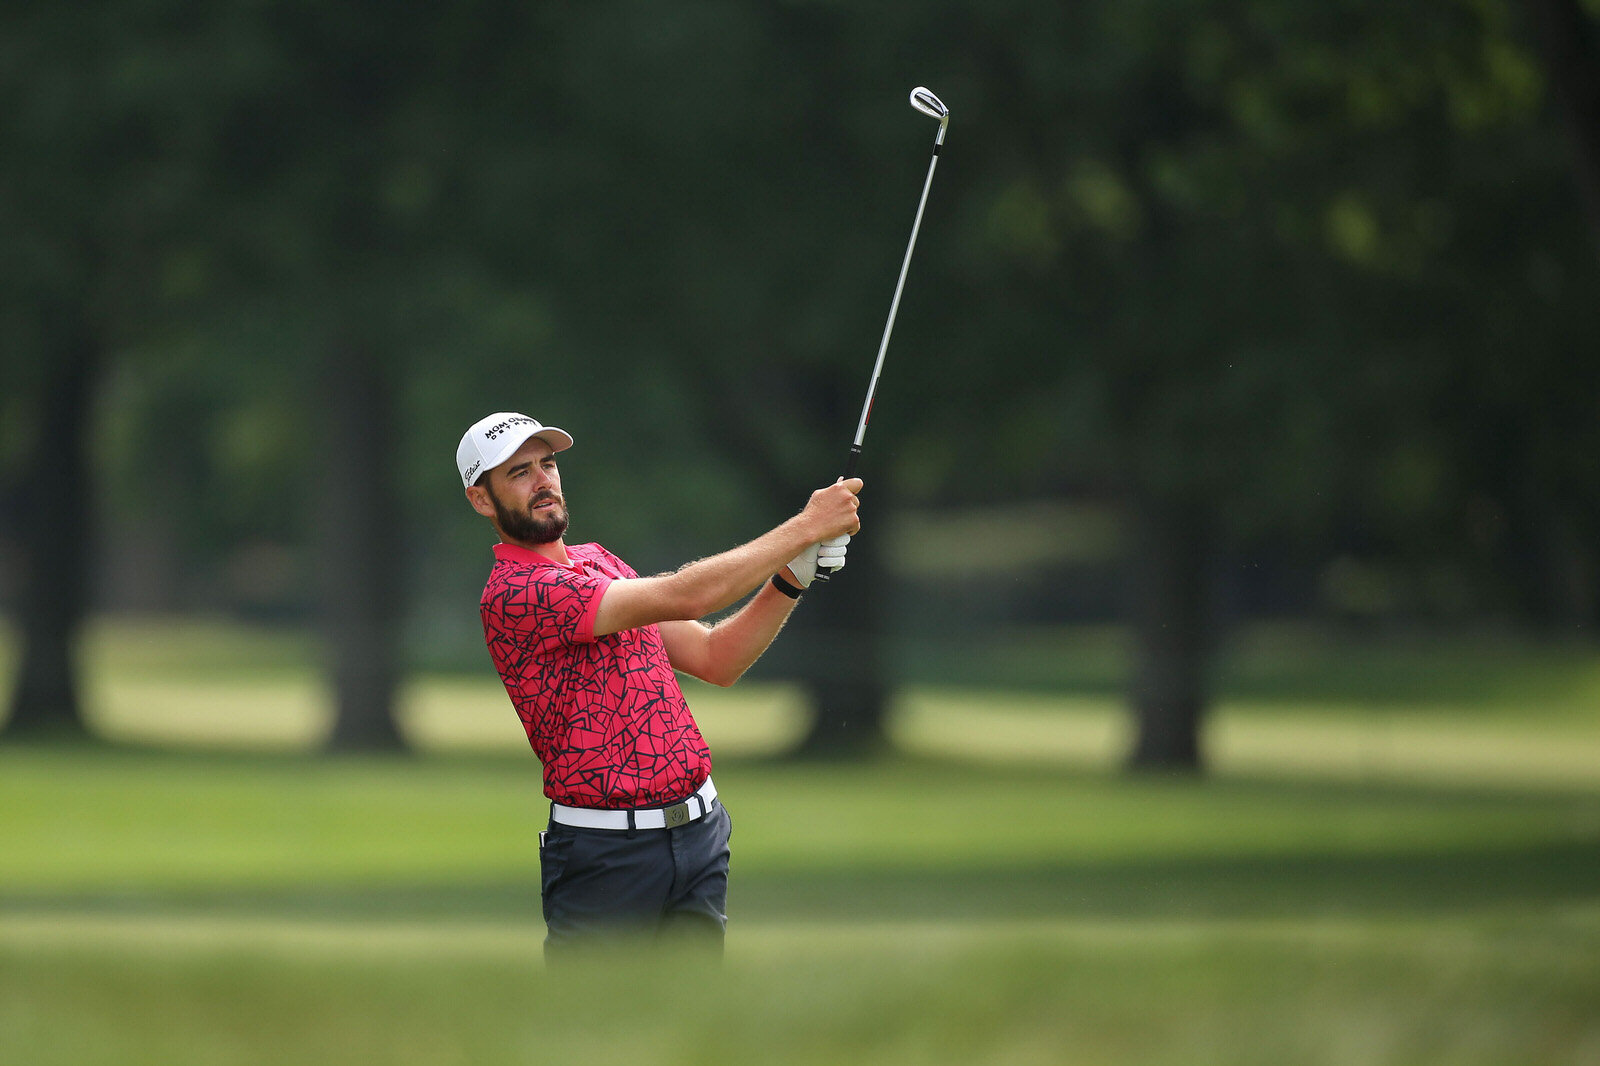  DETROIT, MICHIGAN - JULY 04: Troy Merritt of the United States plays a shot on the 18th hole during the third round of the Rocket Mortgage Classic on July 04, 2020 at the Detroit Golf Club in Detroit, Michigan. (Photo by Leon Halip/Getty Images) 